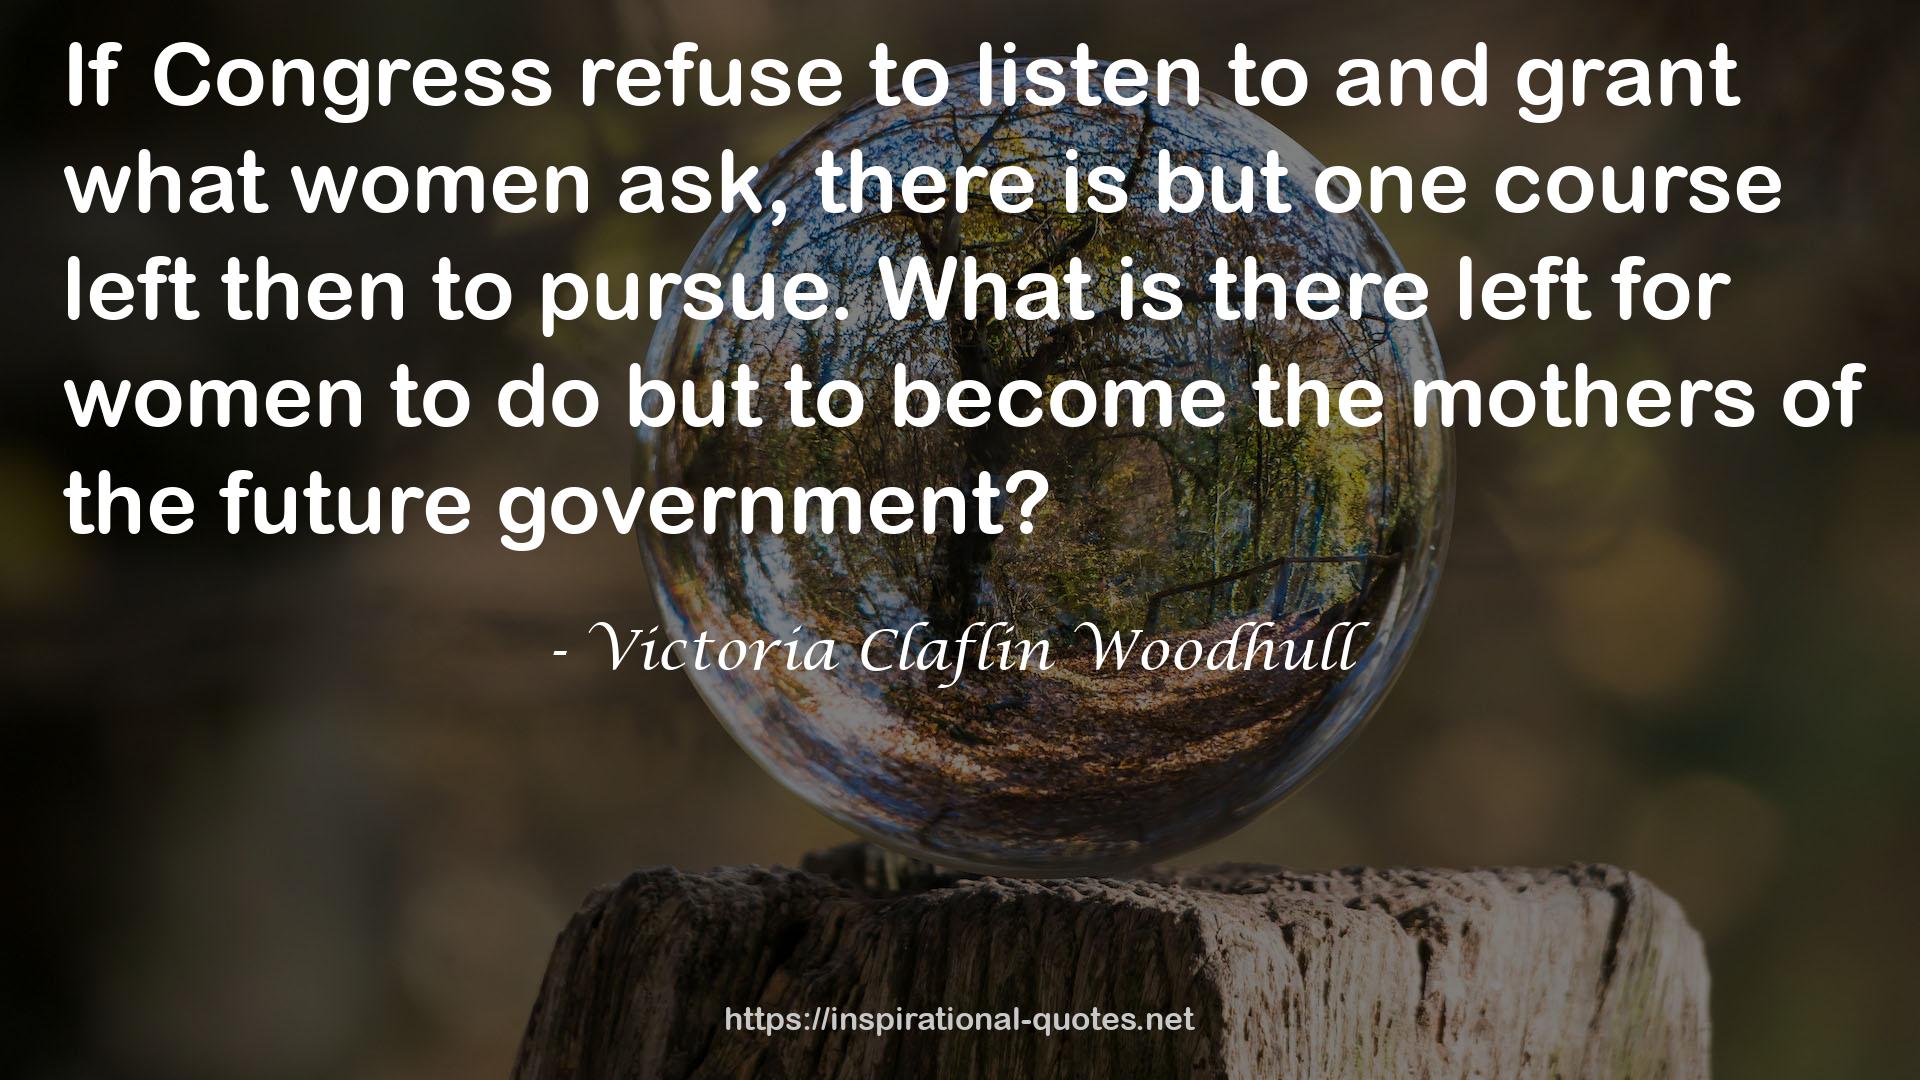 Victoria Claflin Woodhull QUOTES